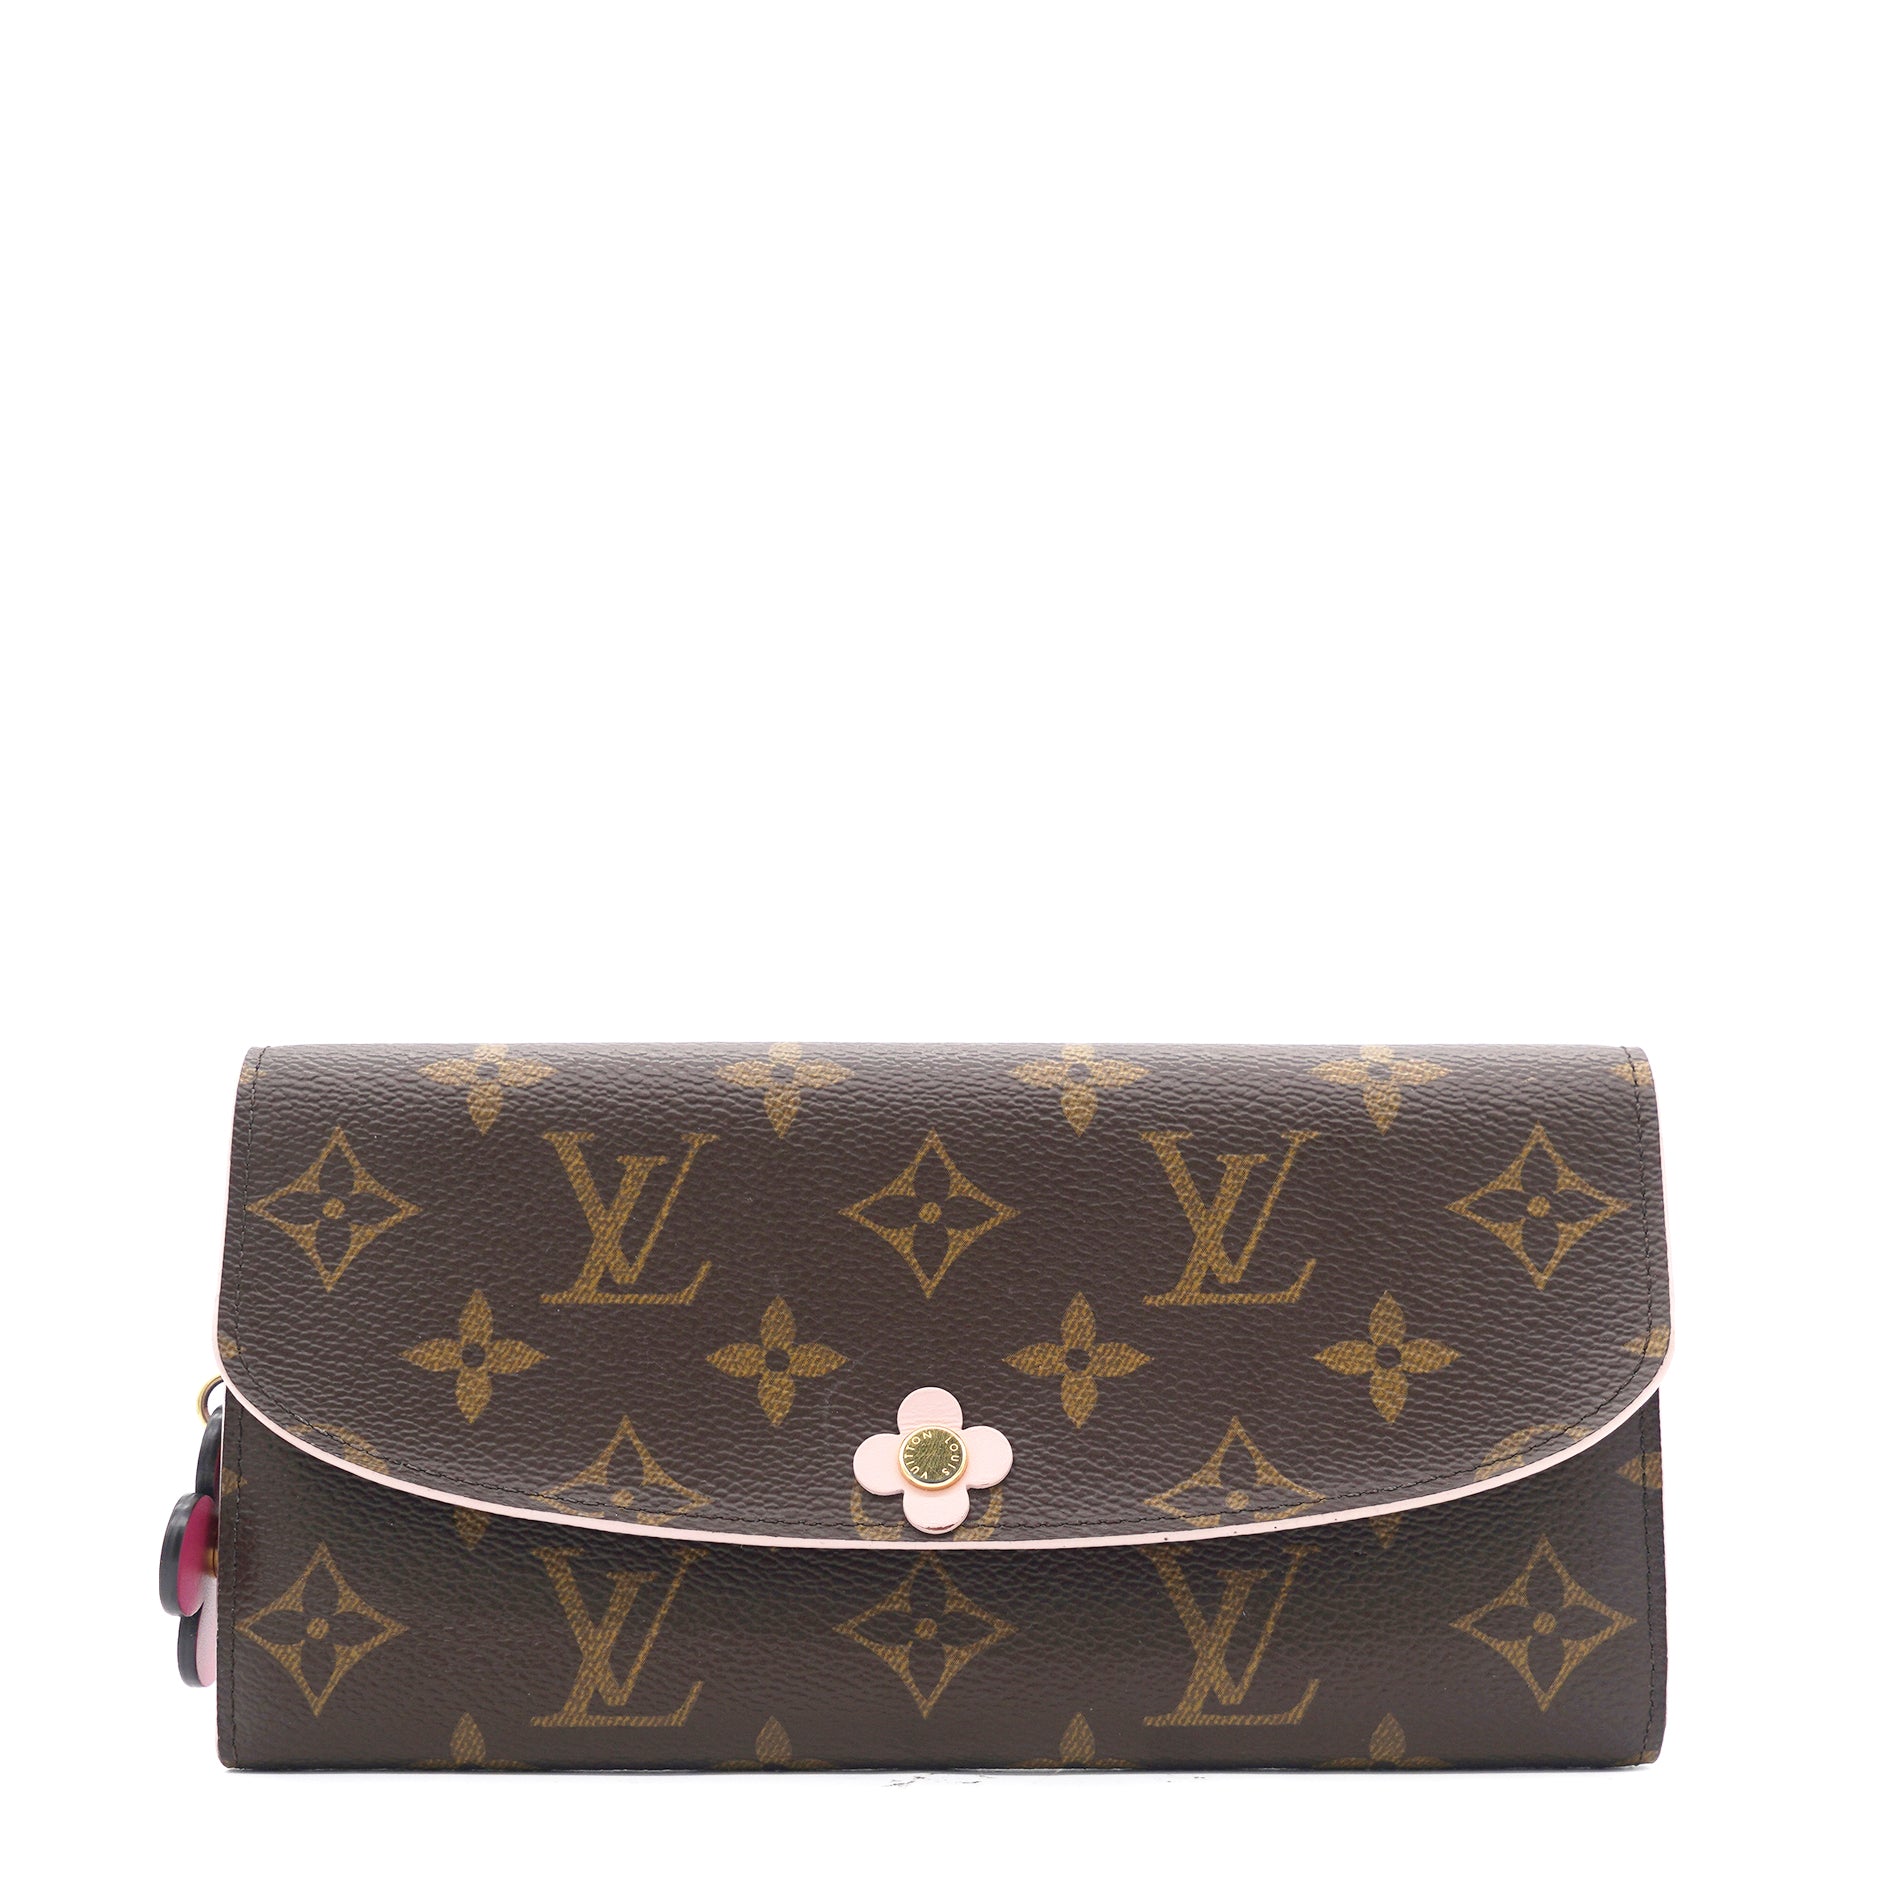 Louis Vuitton - Authenticated Emilie Wallet - Leather Brown for Women, Very Good Condition